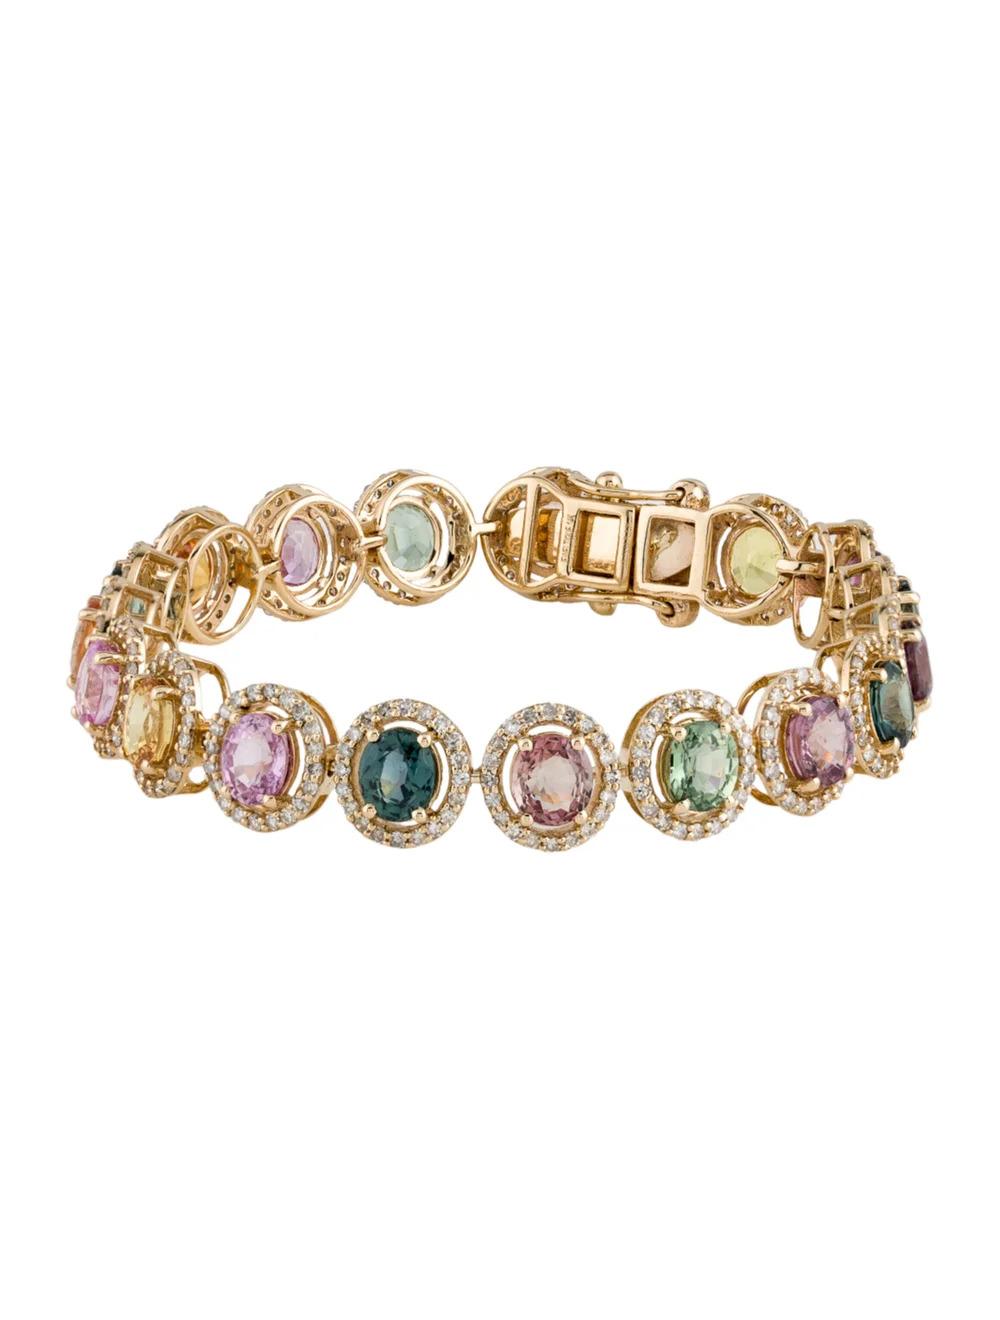 Elevate your wrist with this exquisite 14K yellow gold link bracelet, adorned with a dazzling array of gemstones, including a magnificent 14.33 carat oval modified brilliant sapphire.

Specifications:

* Metal Type: 14K Yellow Gold
* Gemstone: